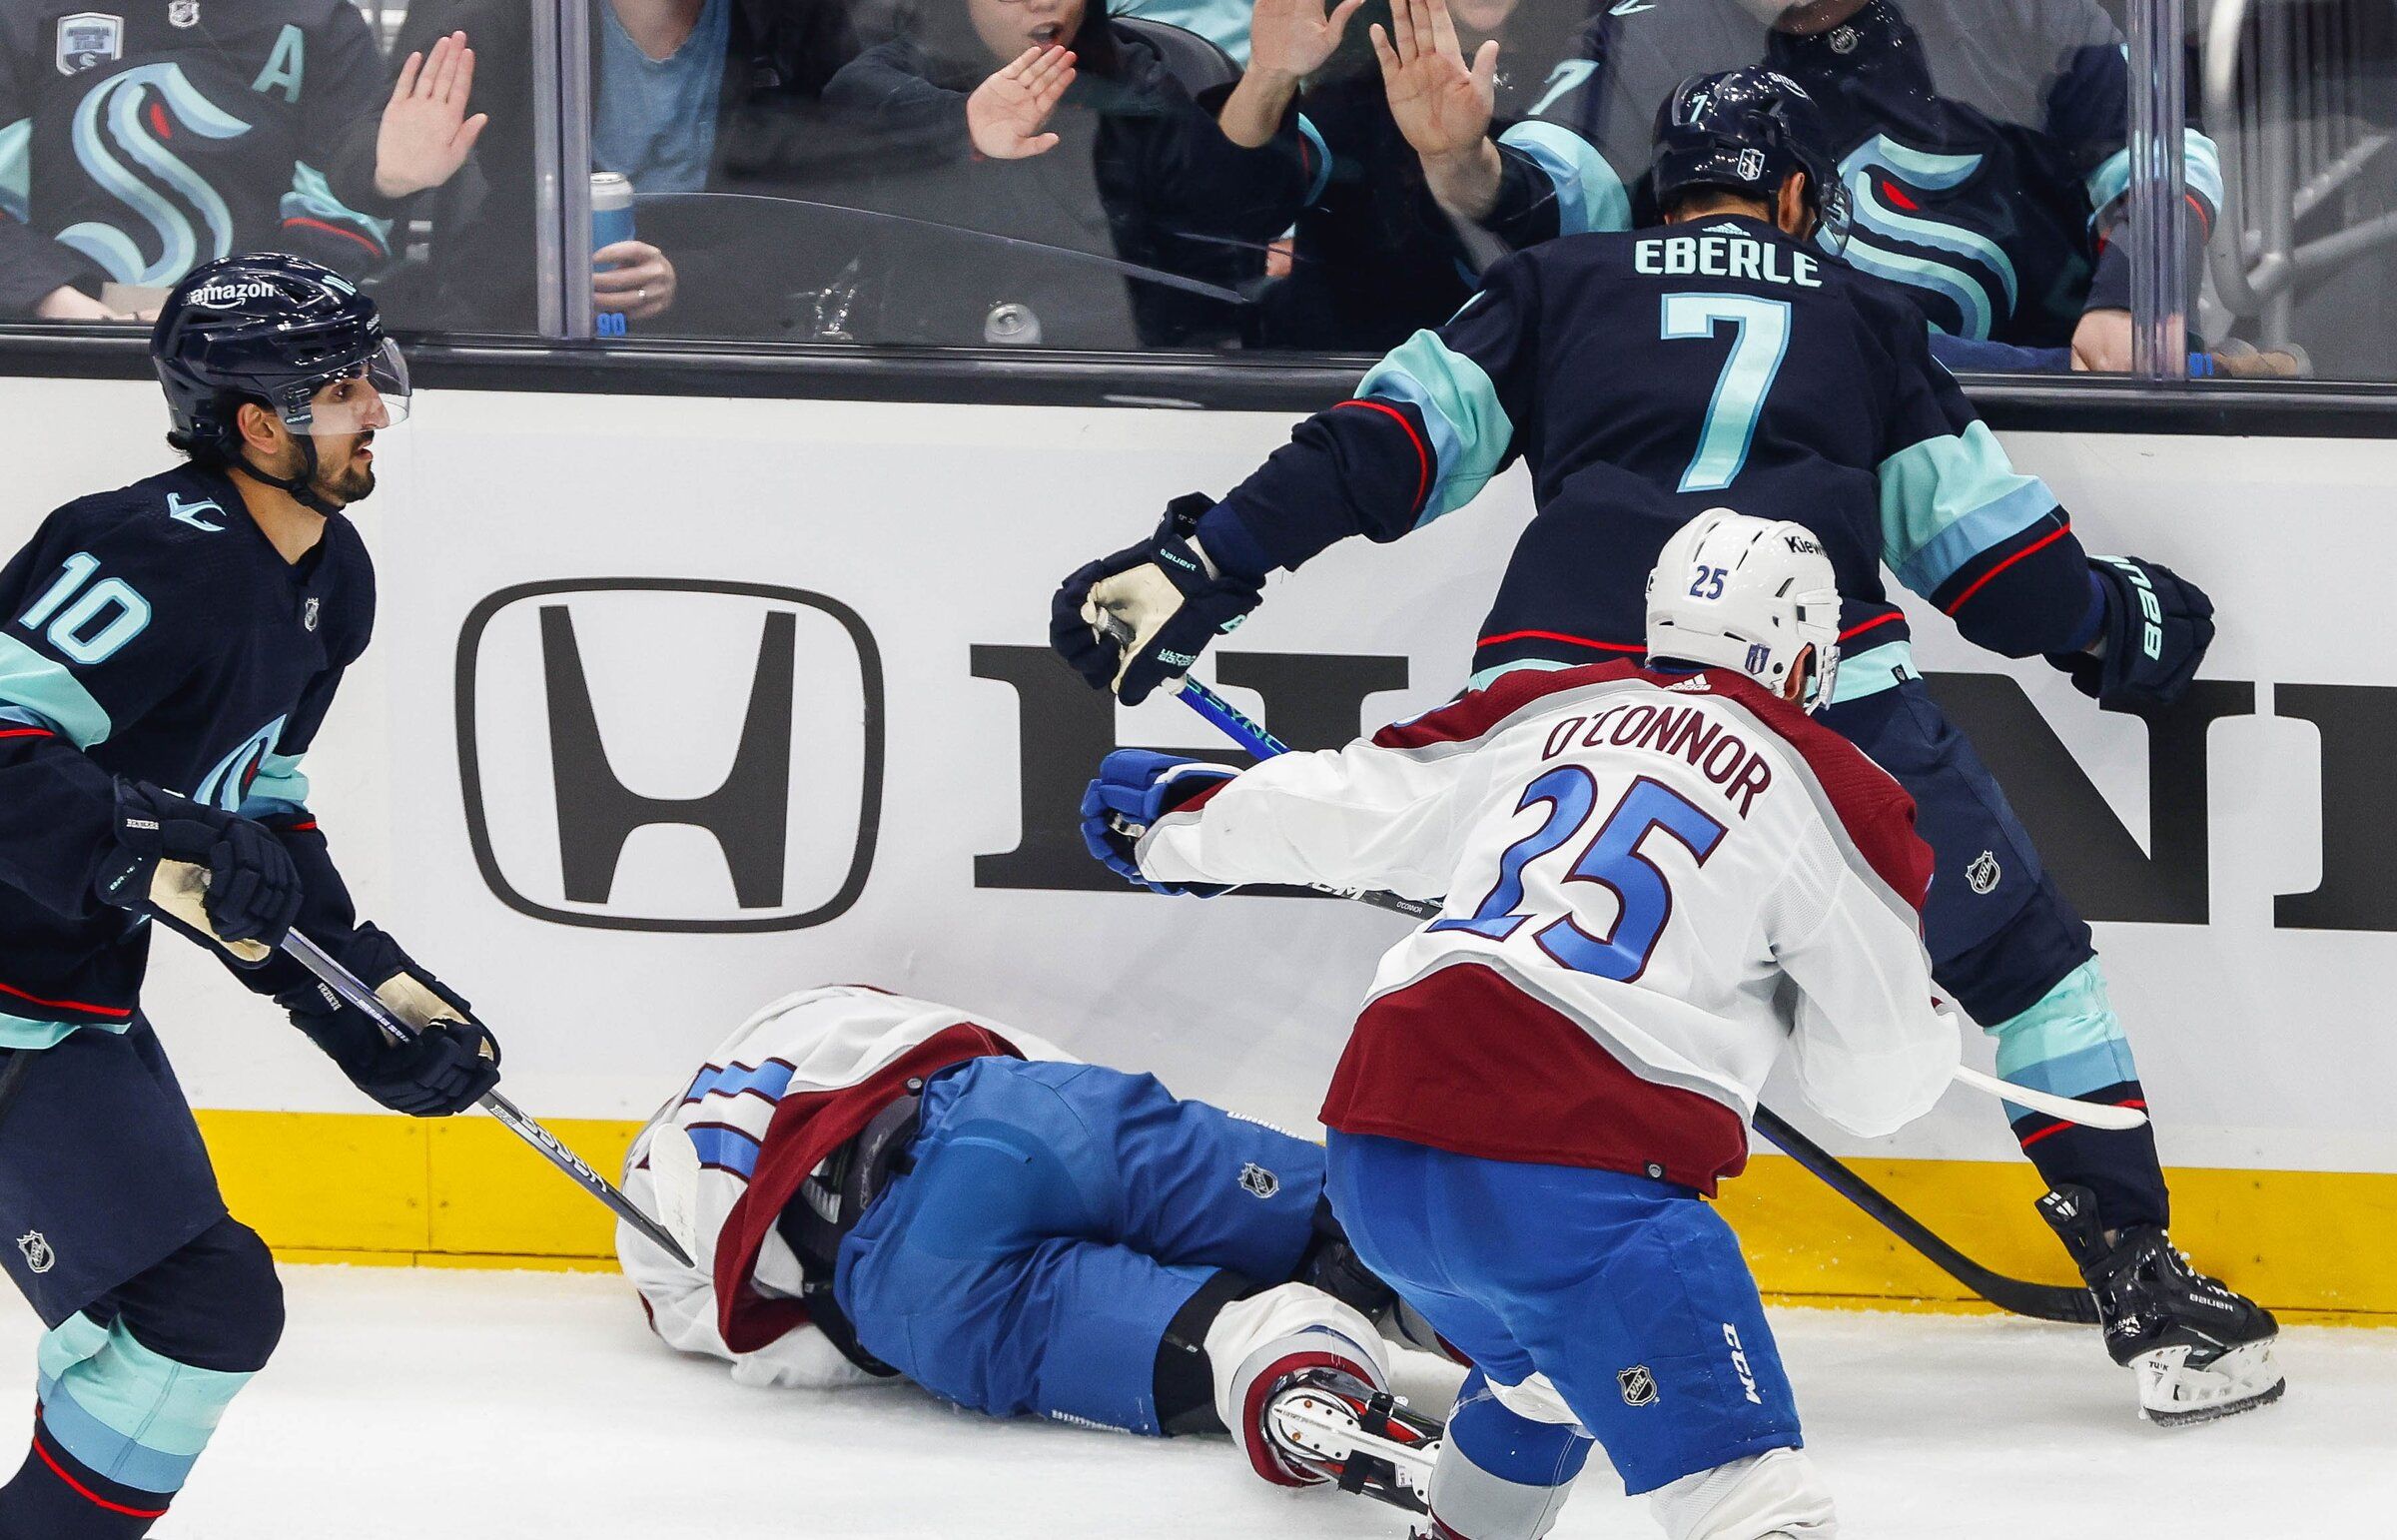 Live playoff updates: Avalanche beats Sharks in OT to force Game 7